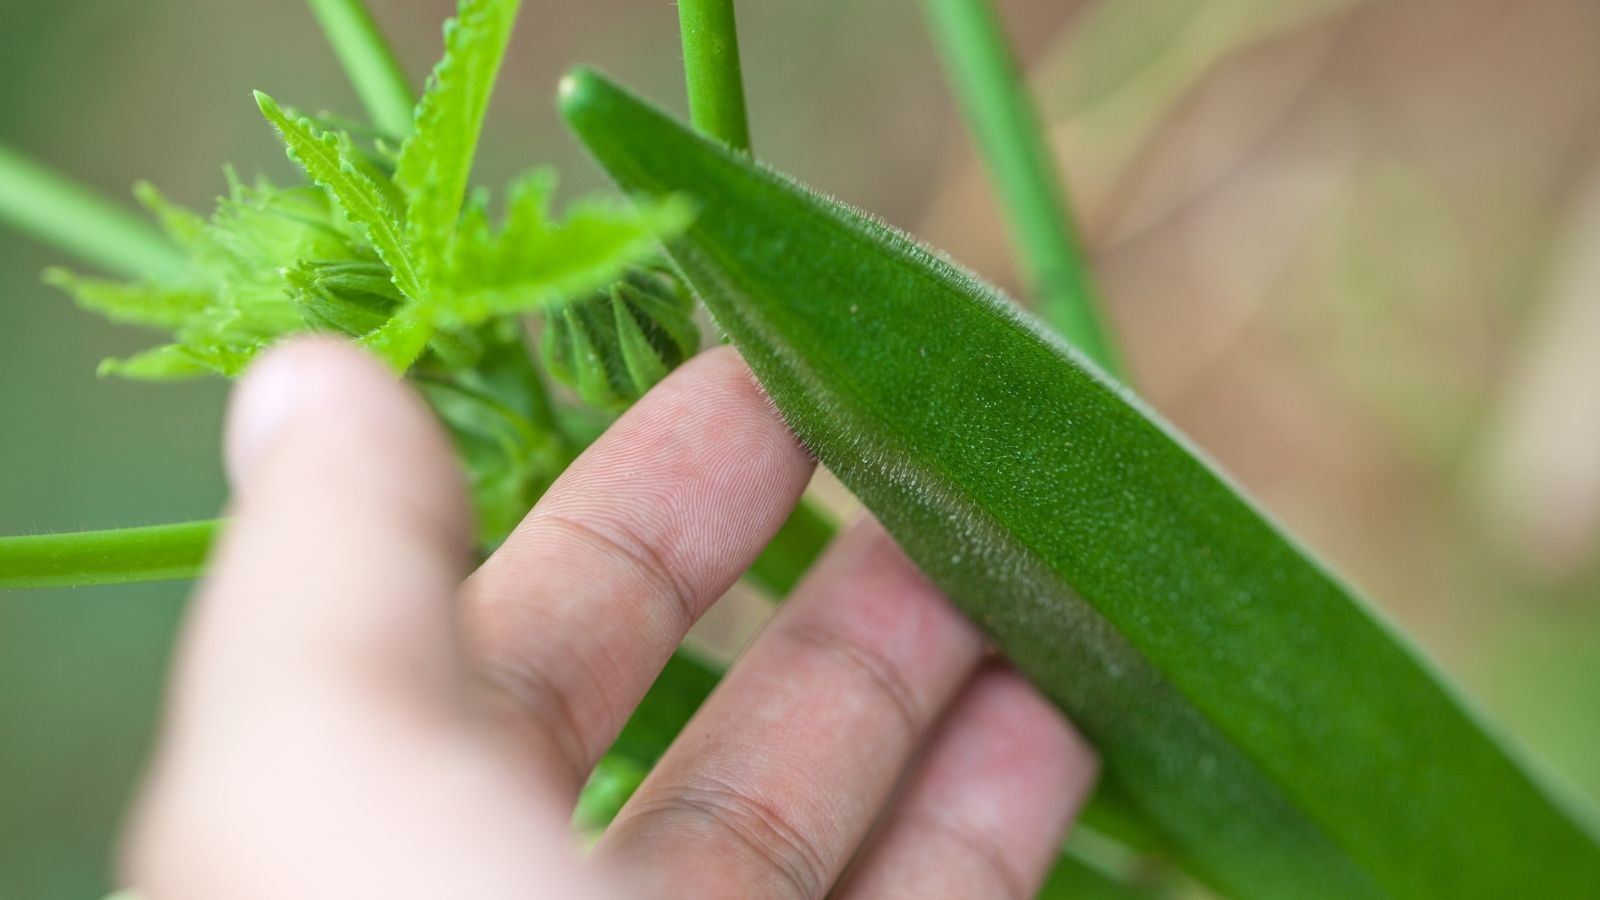 Tips for getting the most out of companion planting with okra